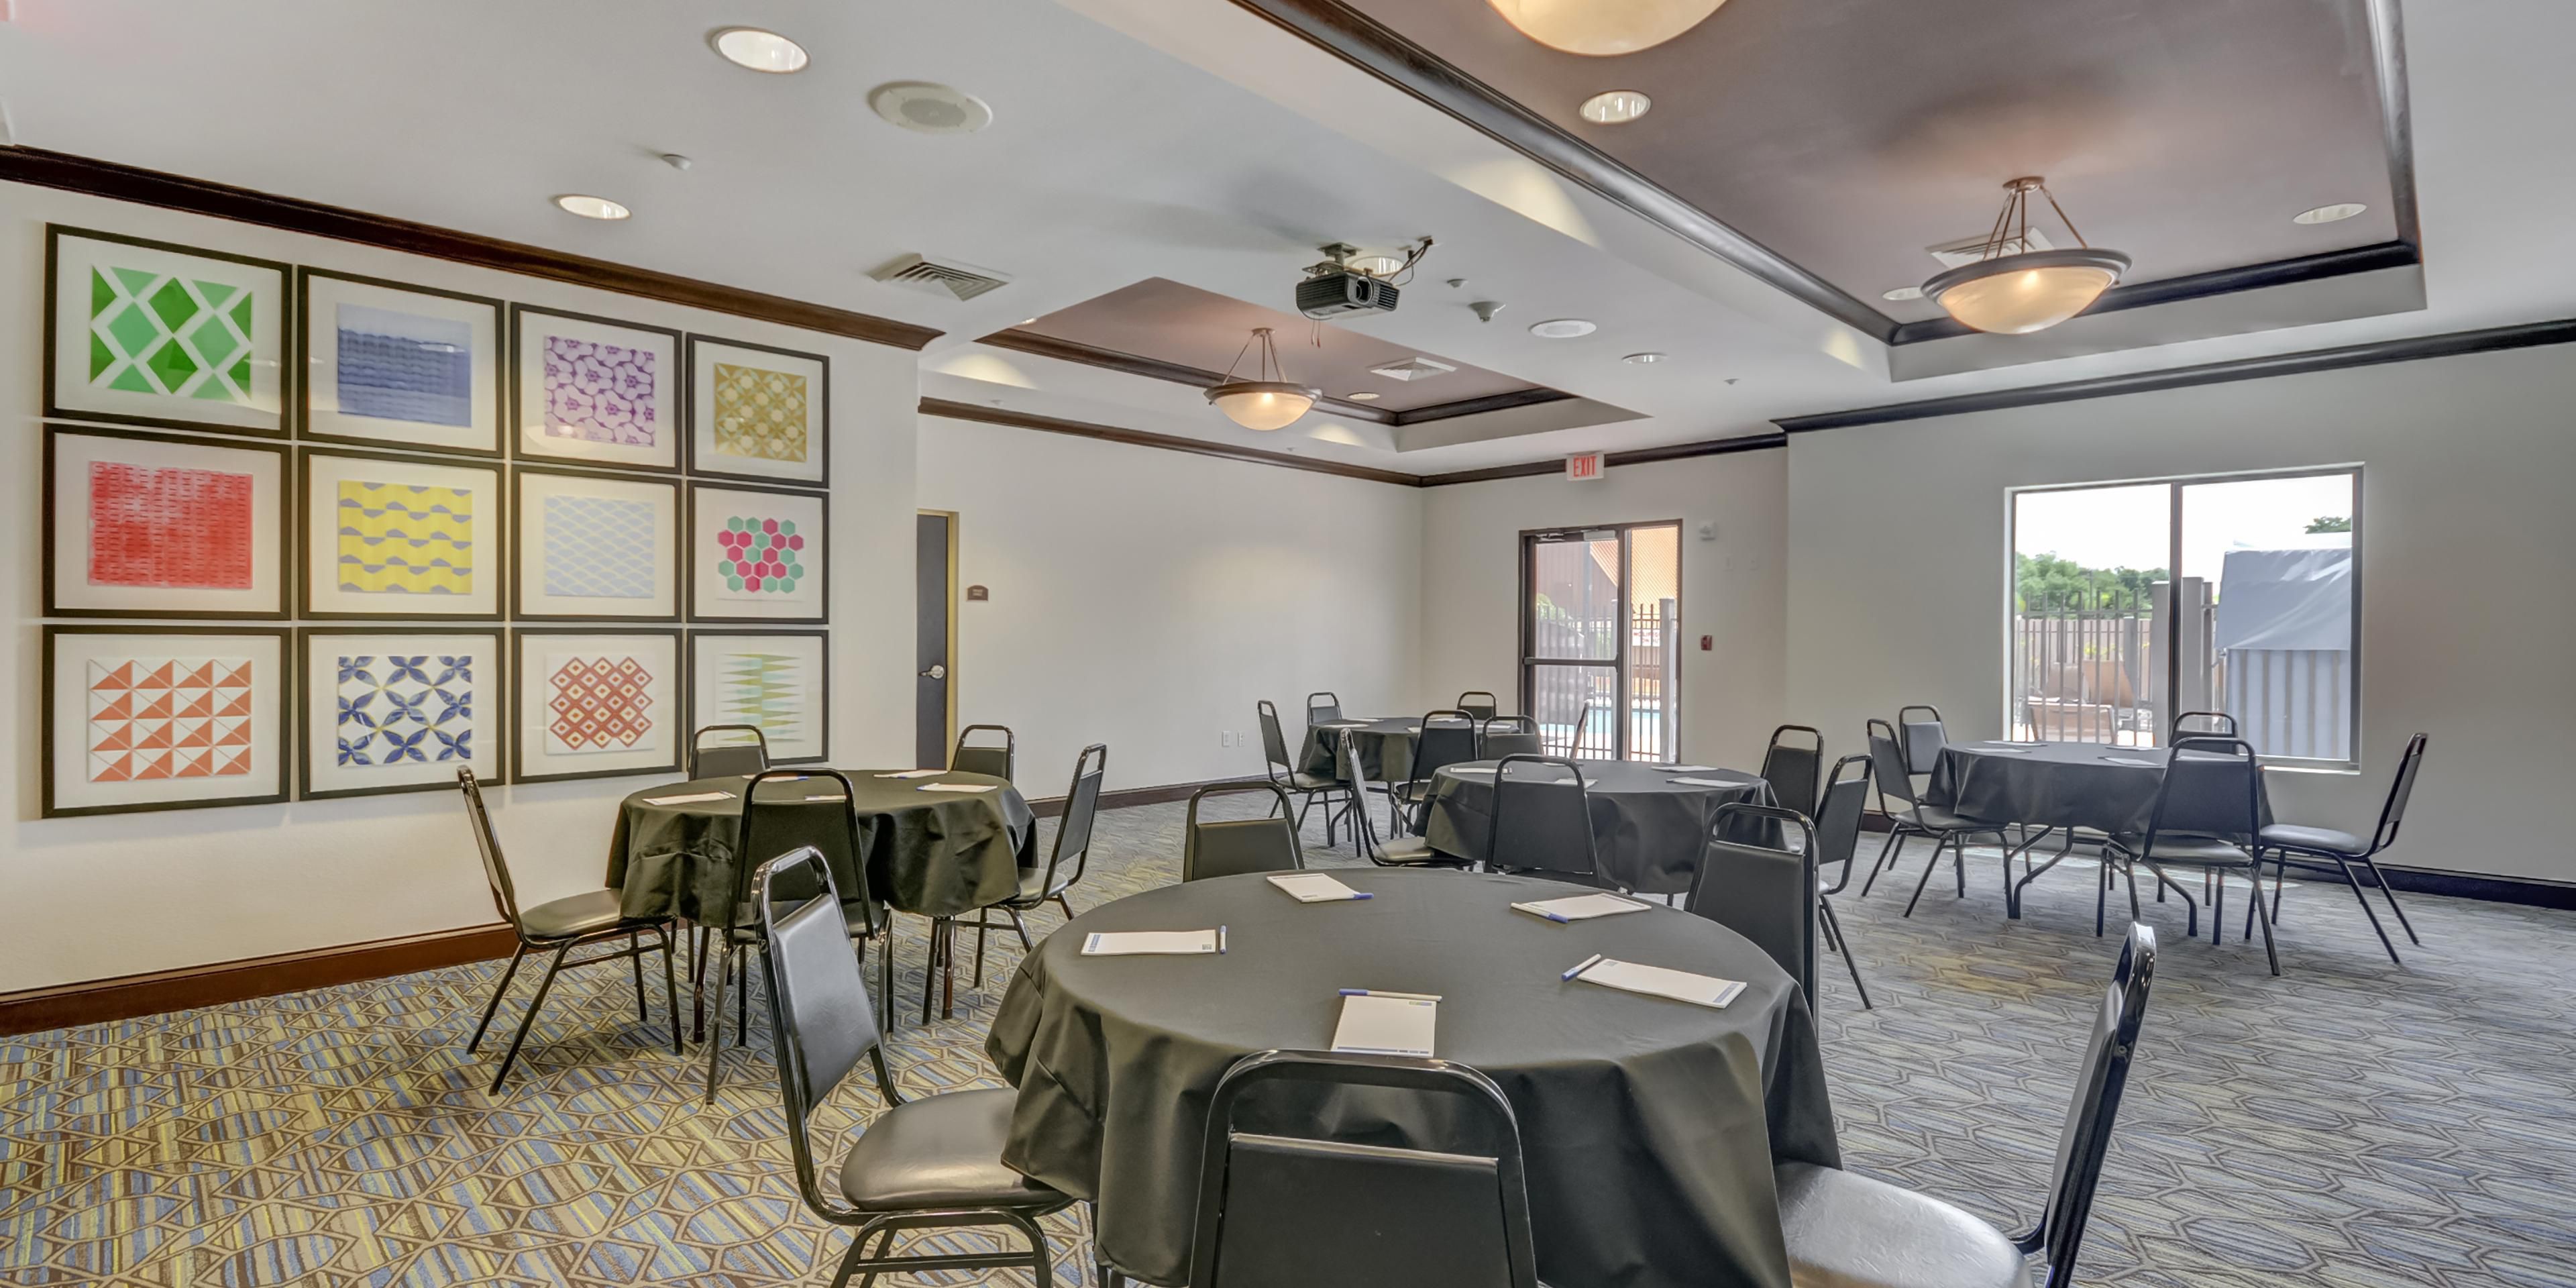 Take advantage of our well-appointed meeting room (with capacity up to 40 people) and our knowledgeable and professional Sales staff as you plan your next meeting, event, or group block. Send an email today for access to room rate discounts and meeting space rentals.